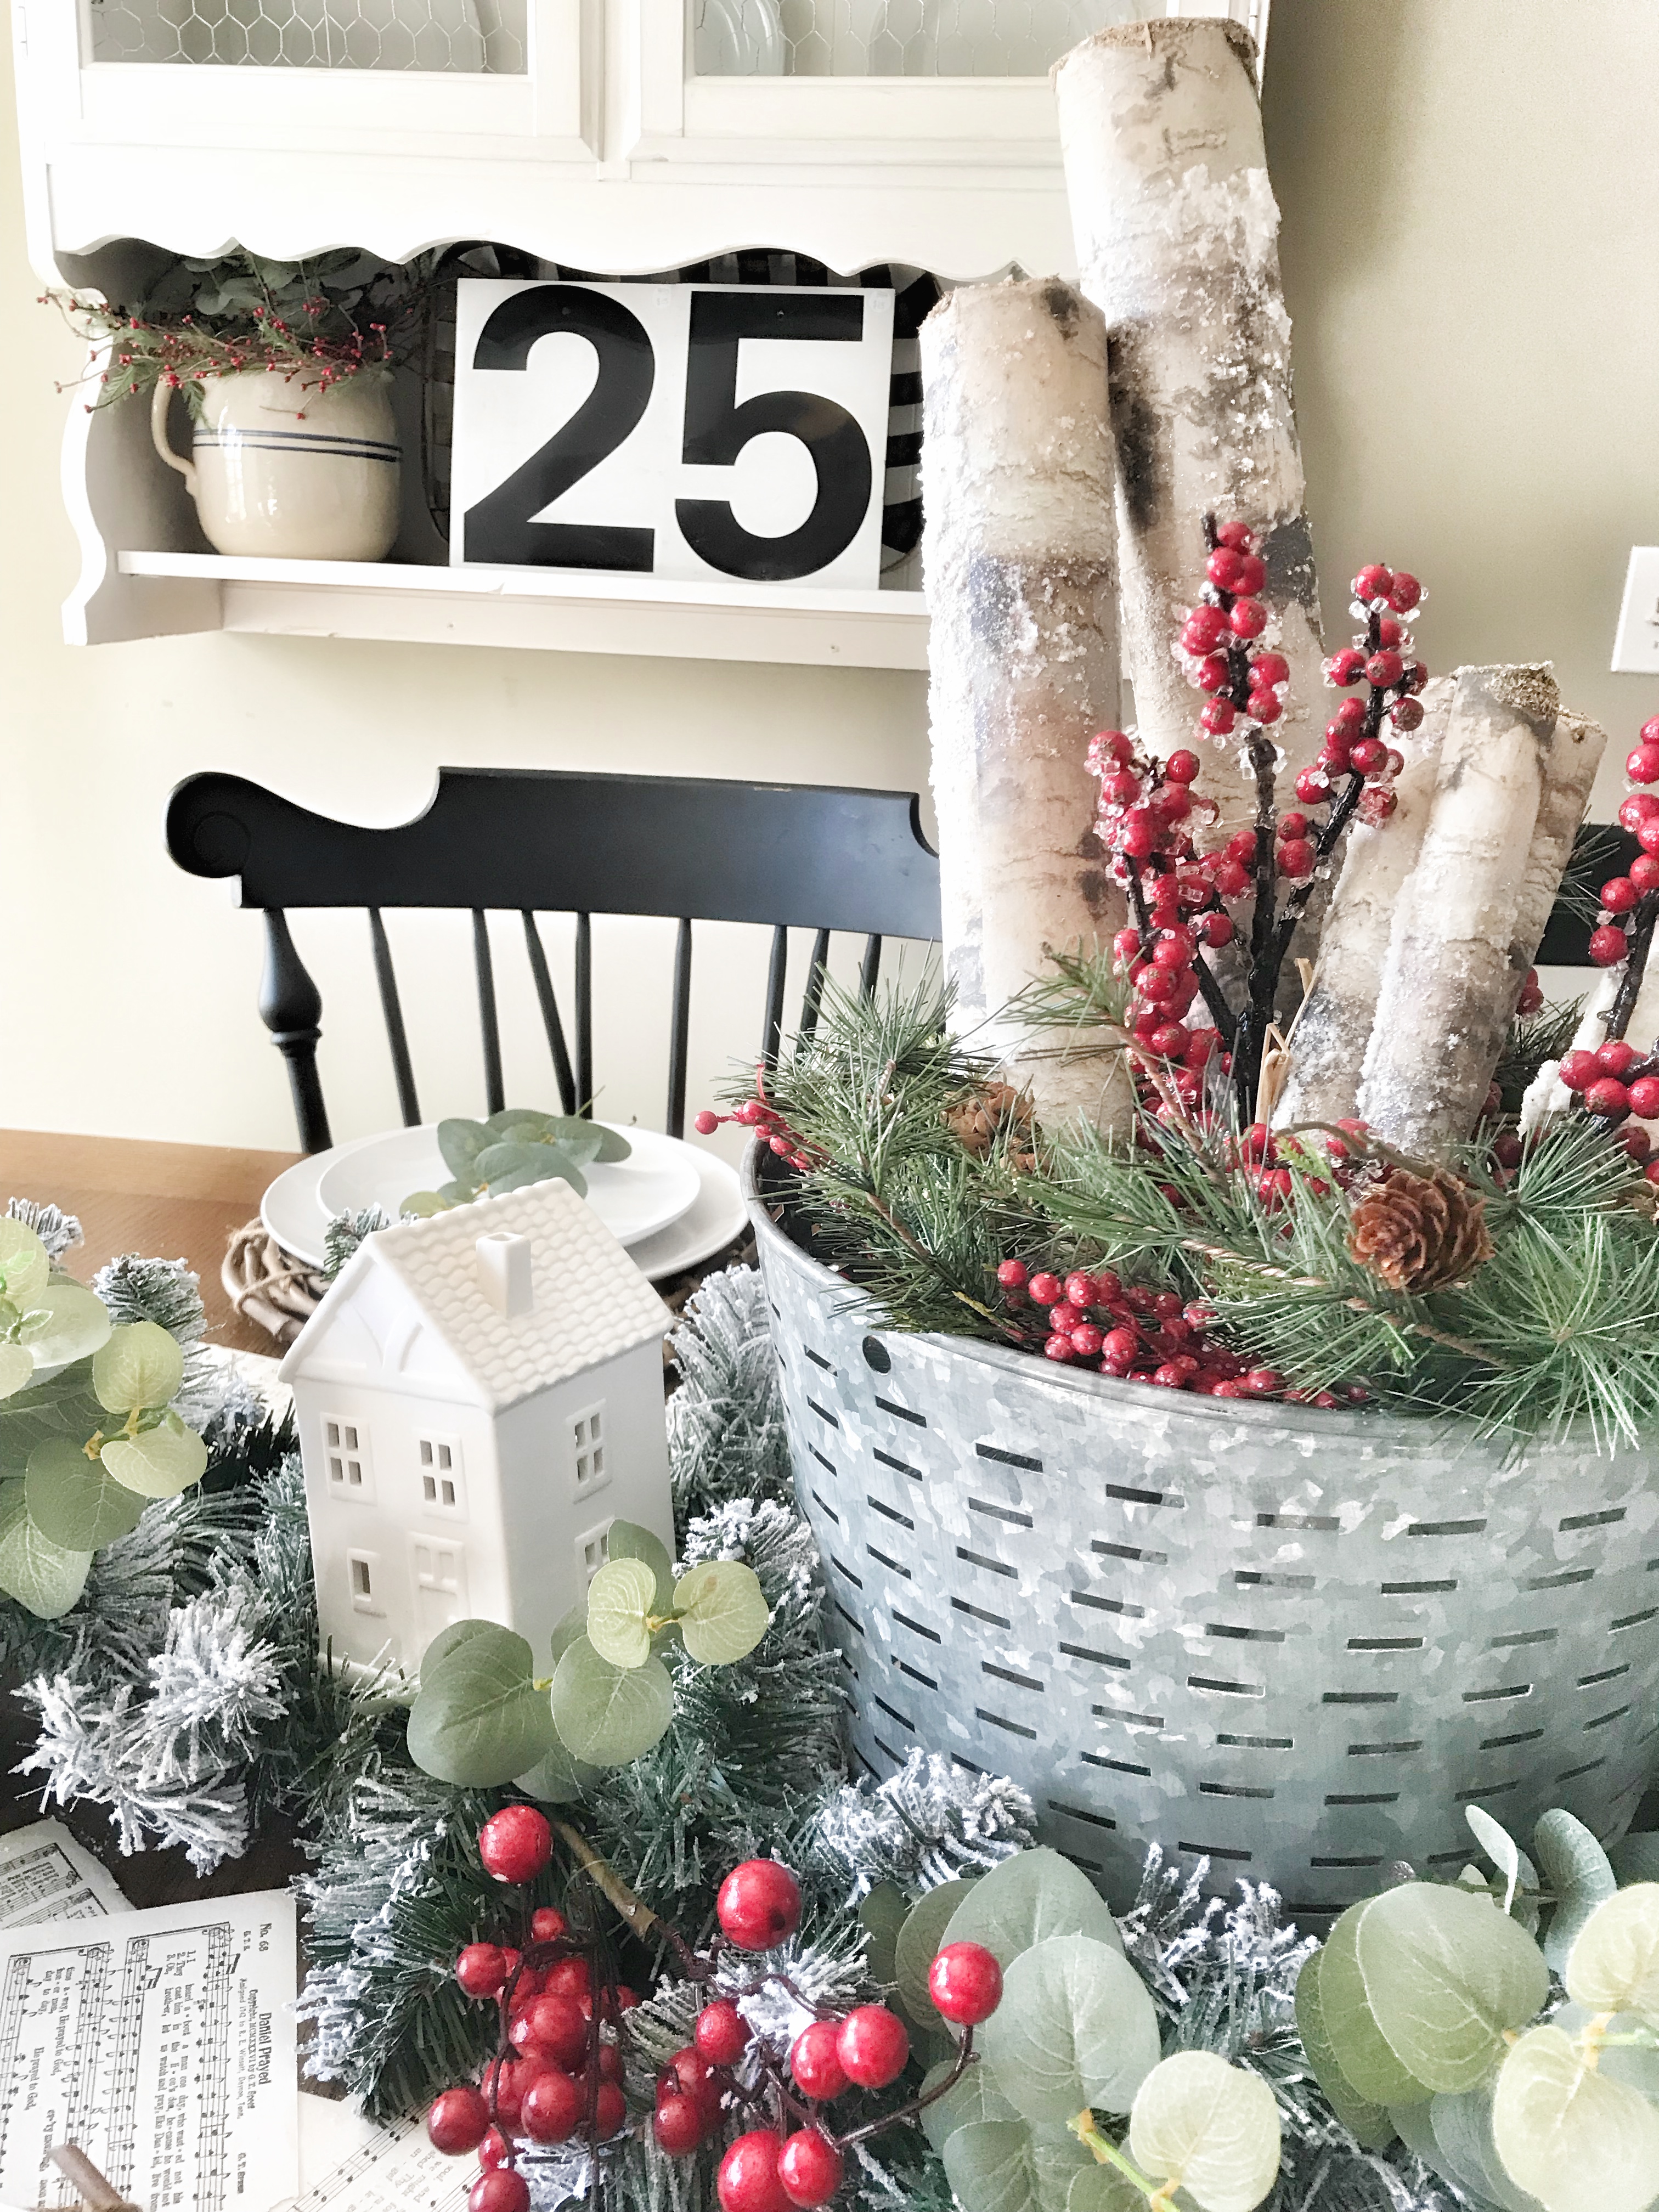 Christmas table decor with white cottages and garland